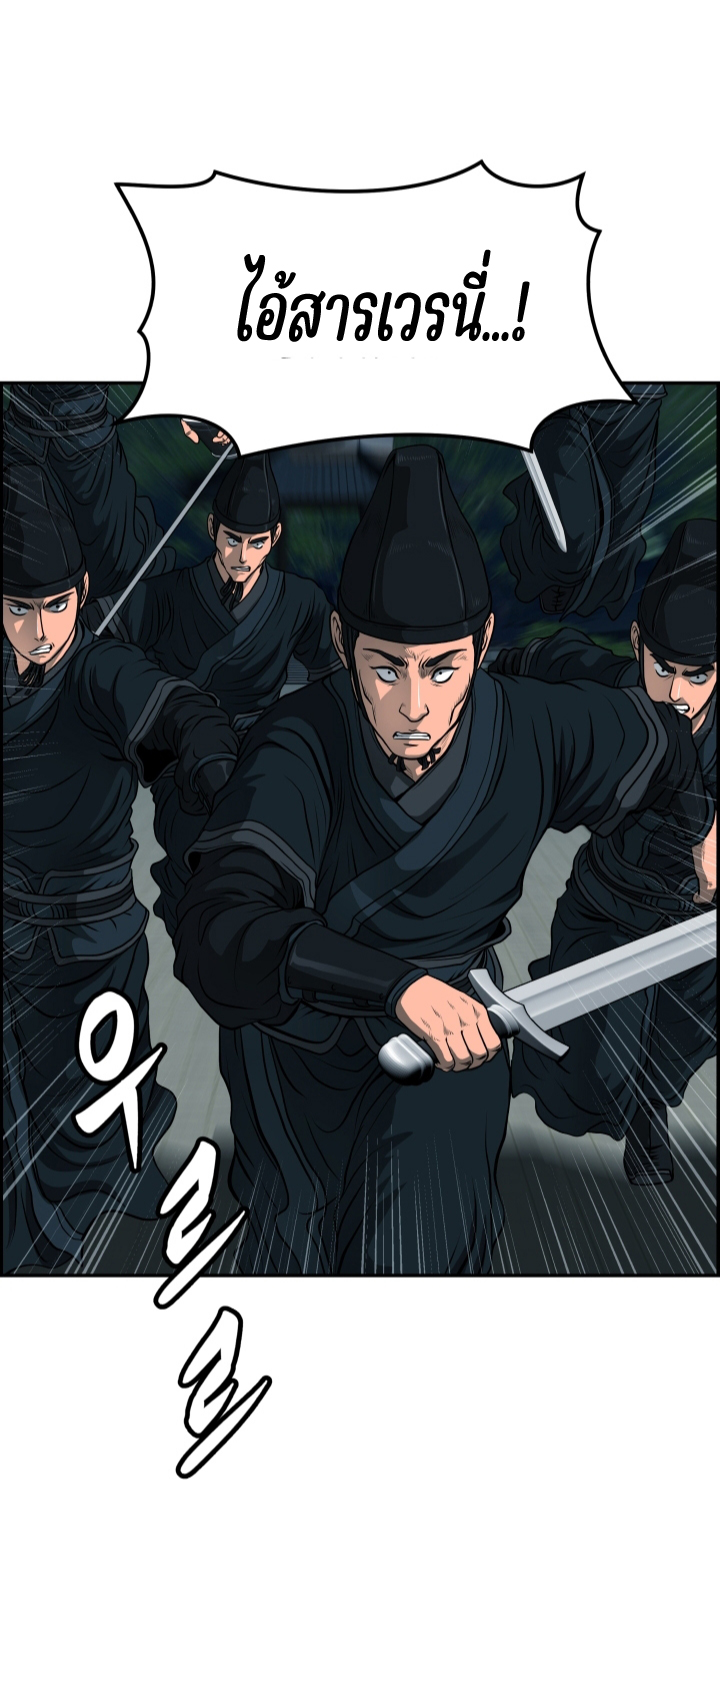 Blade of Wind and Thunder 25 (18)